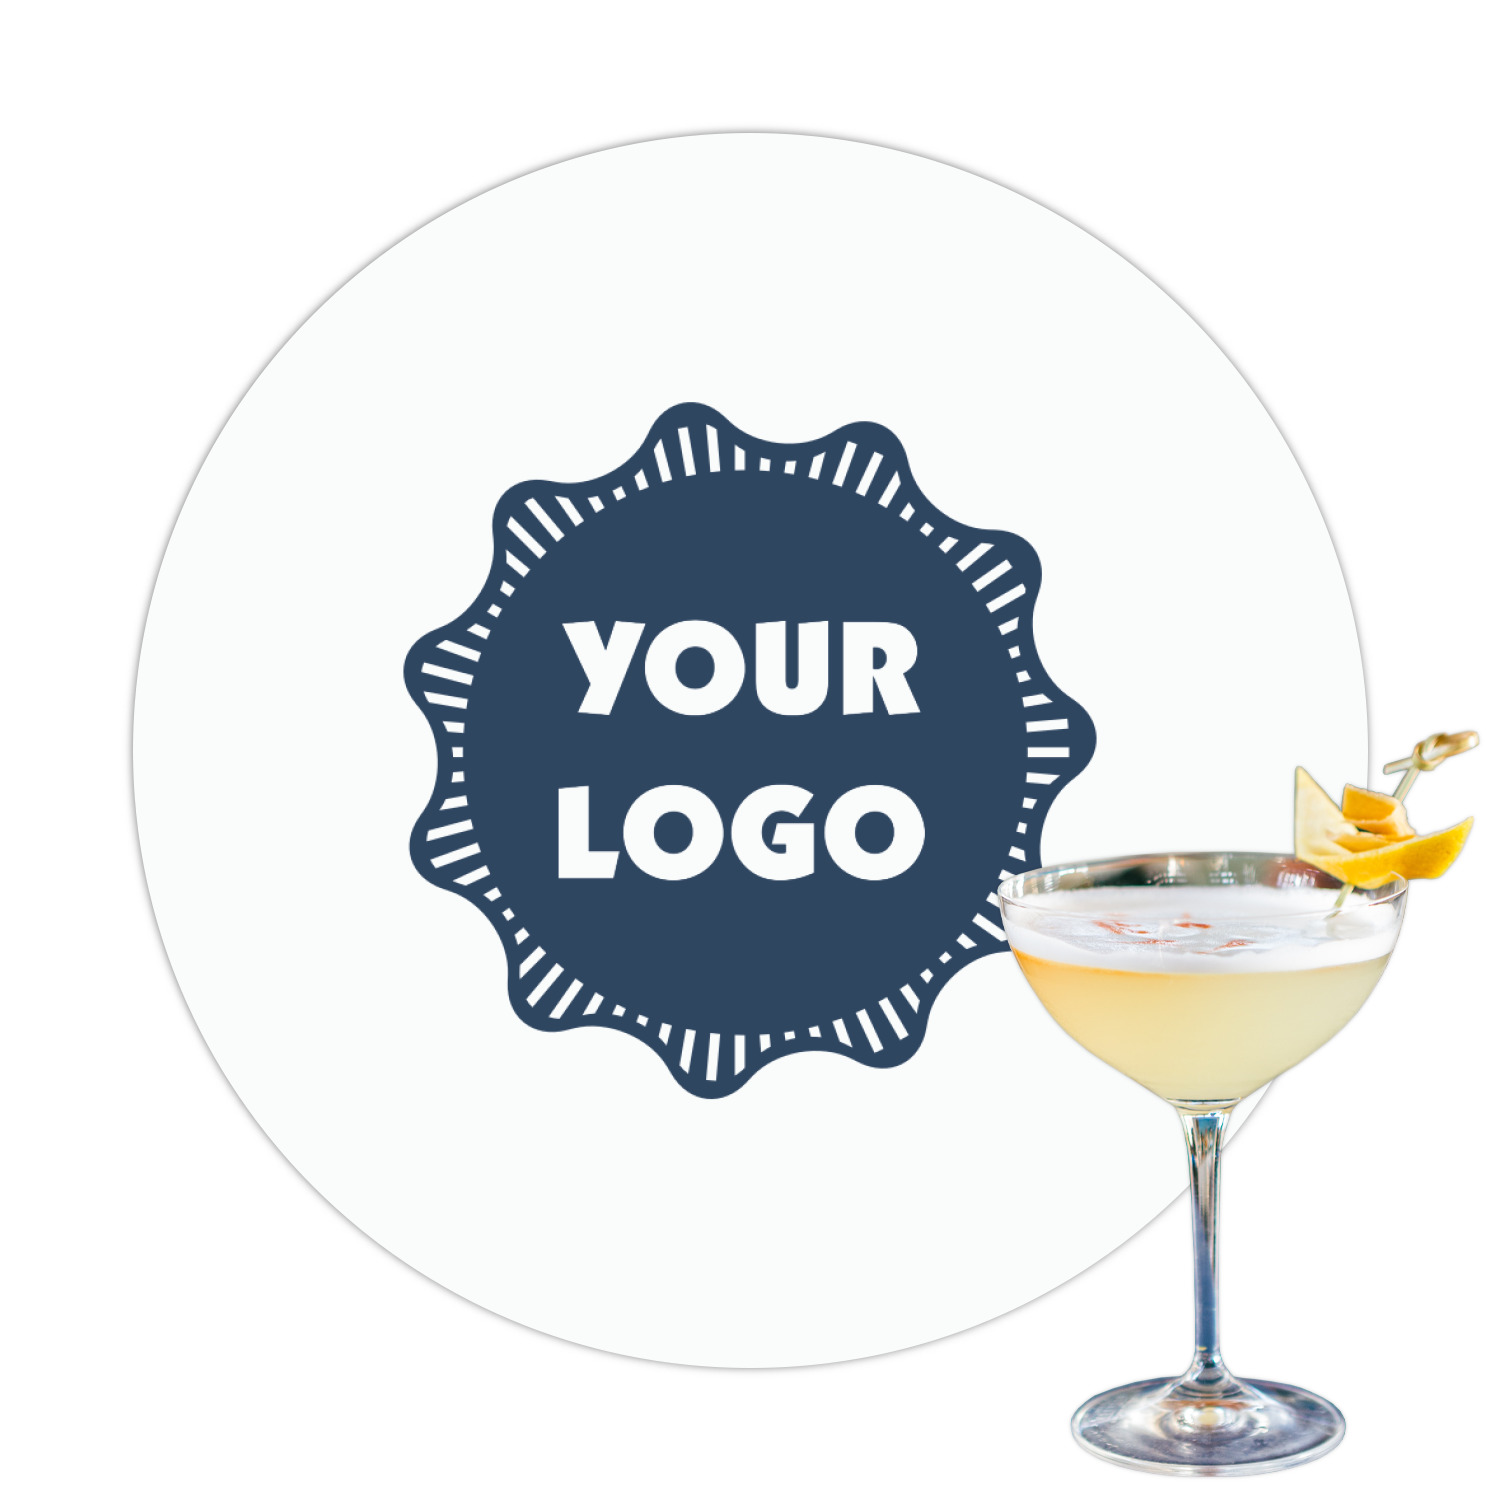 Edible drink/cocktail toppers - Add your own business logo AND QR code -  Incredible Toppers